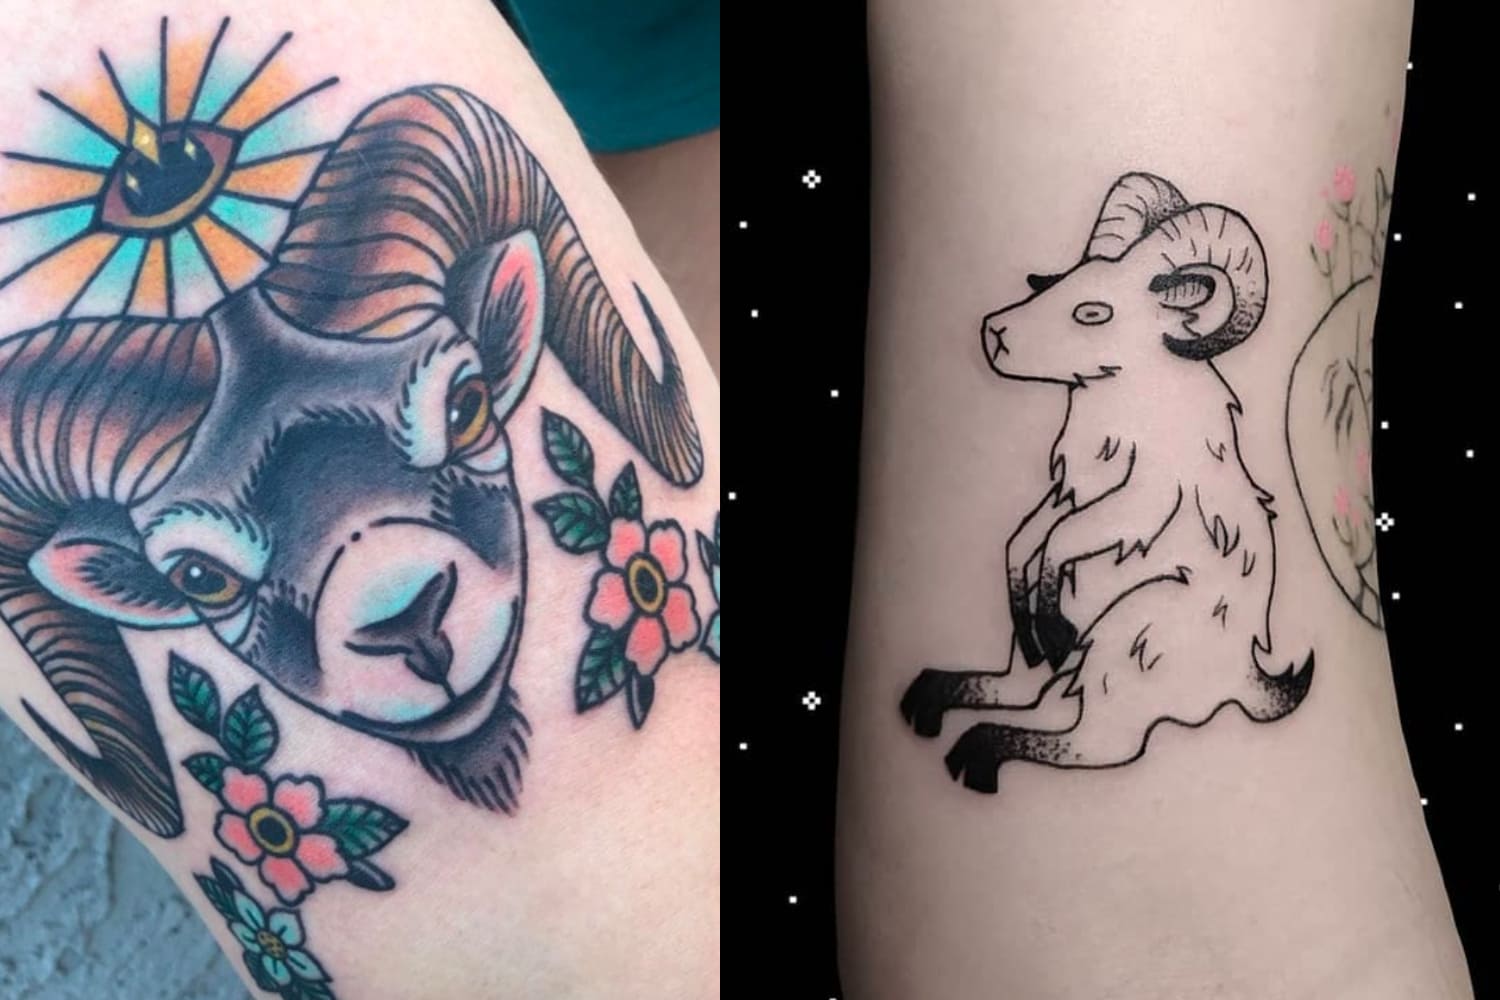 Aries Tattoos to Show Off Your Fiery Passion - Let's Eat Cake